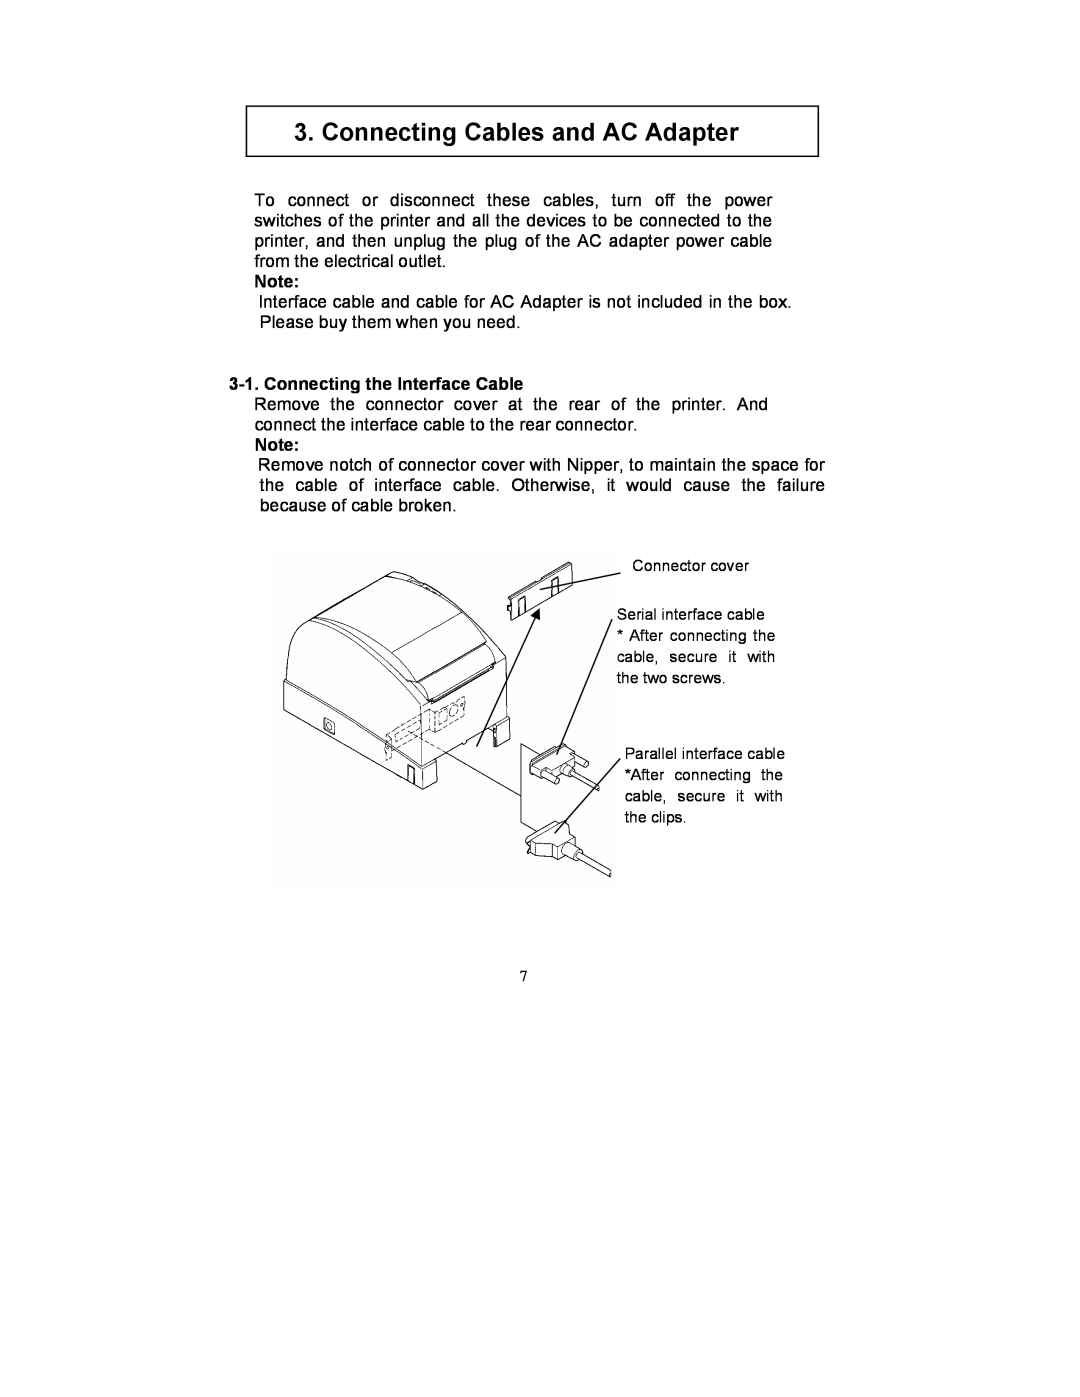 Fujitsu FP-410 user manual Connecting Cables and AC Adapter, Connecting the Interface Cable 